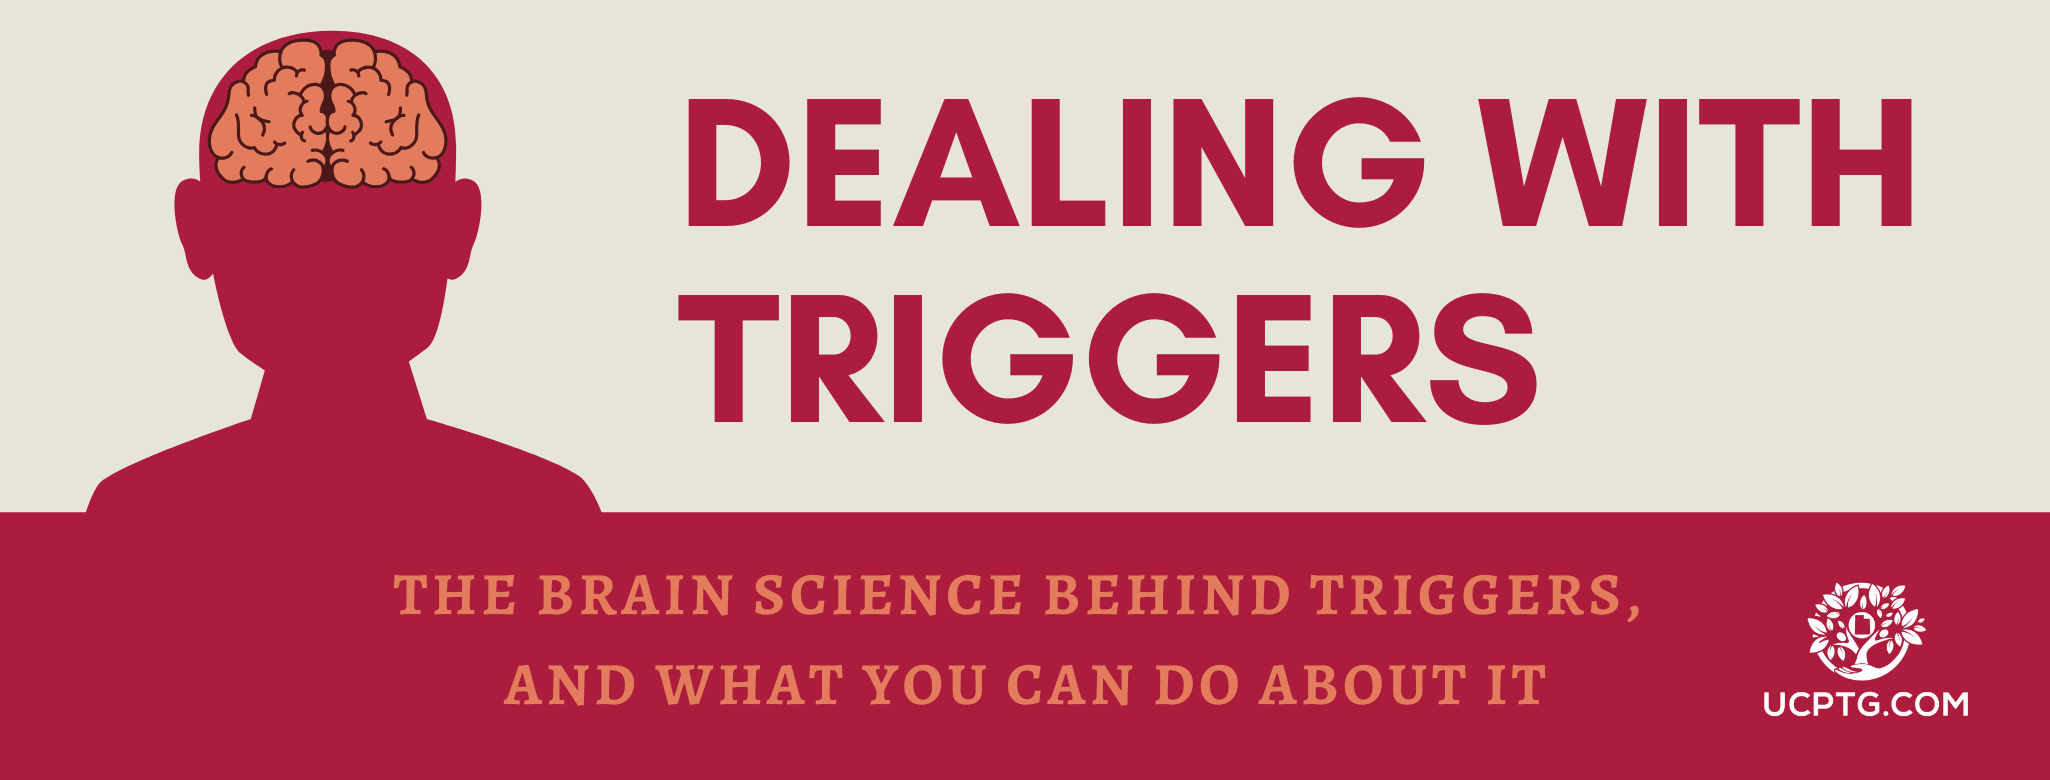 “Dealing with Triggers” workshop June 4th